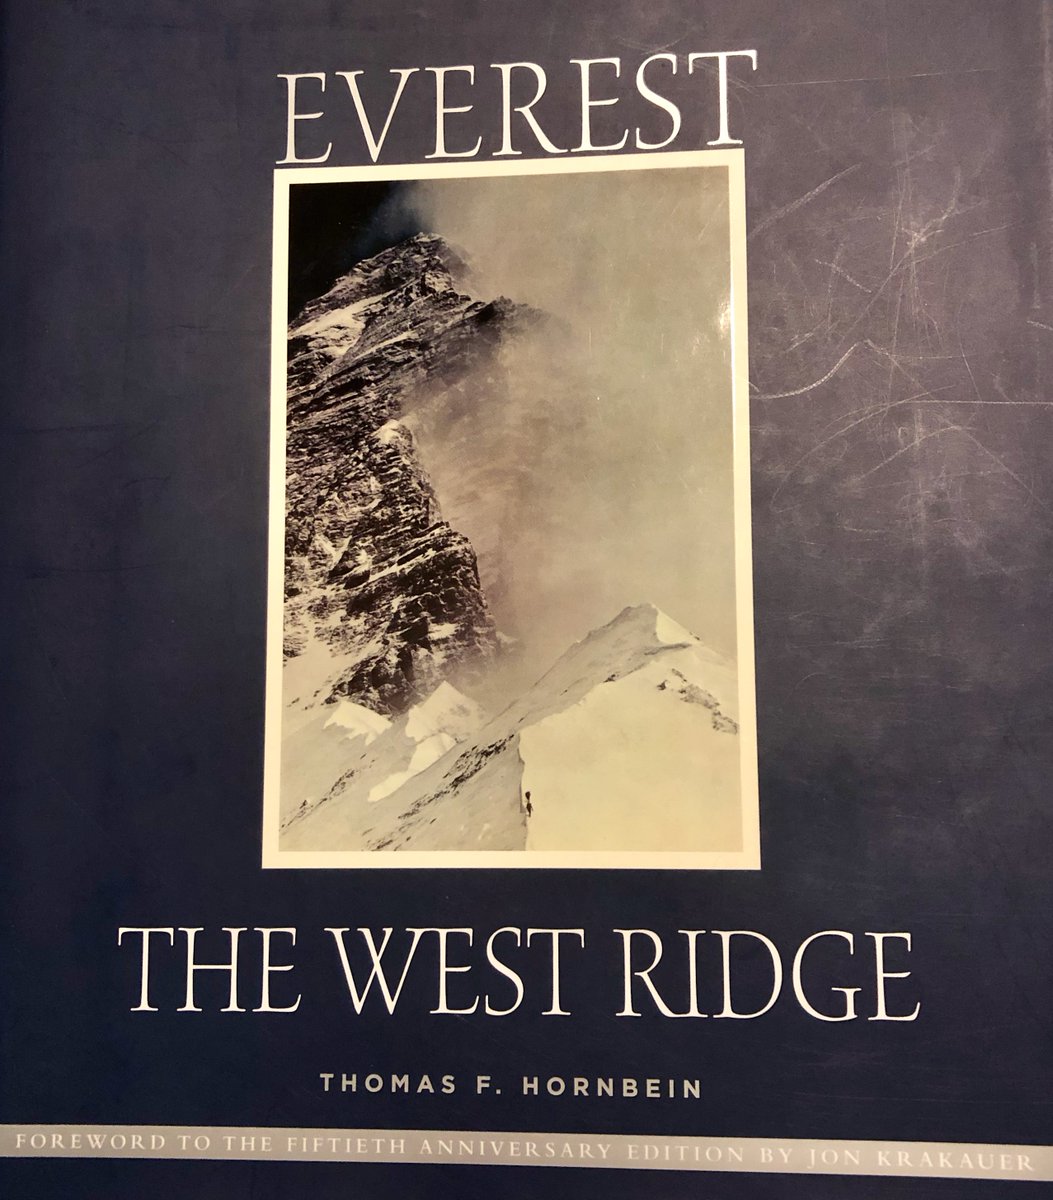 61. So Willi Unsoeld and Tom Hornbein took on the West Ridge of Mount Everest, still considered the greatest mountaineering feat by any North American mountaineer. Hornbein's book is full of amazing photos. They were originally for National Geographic.